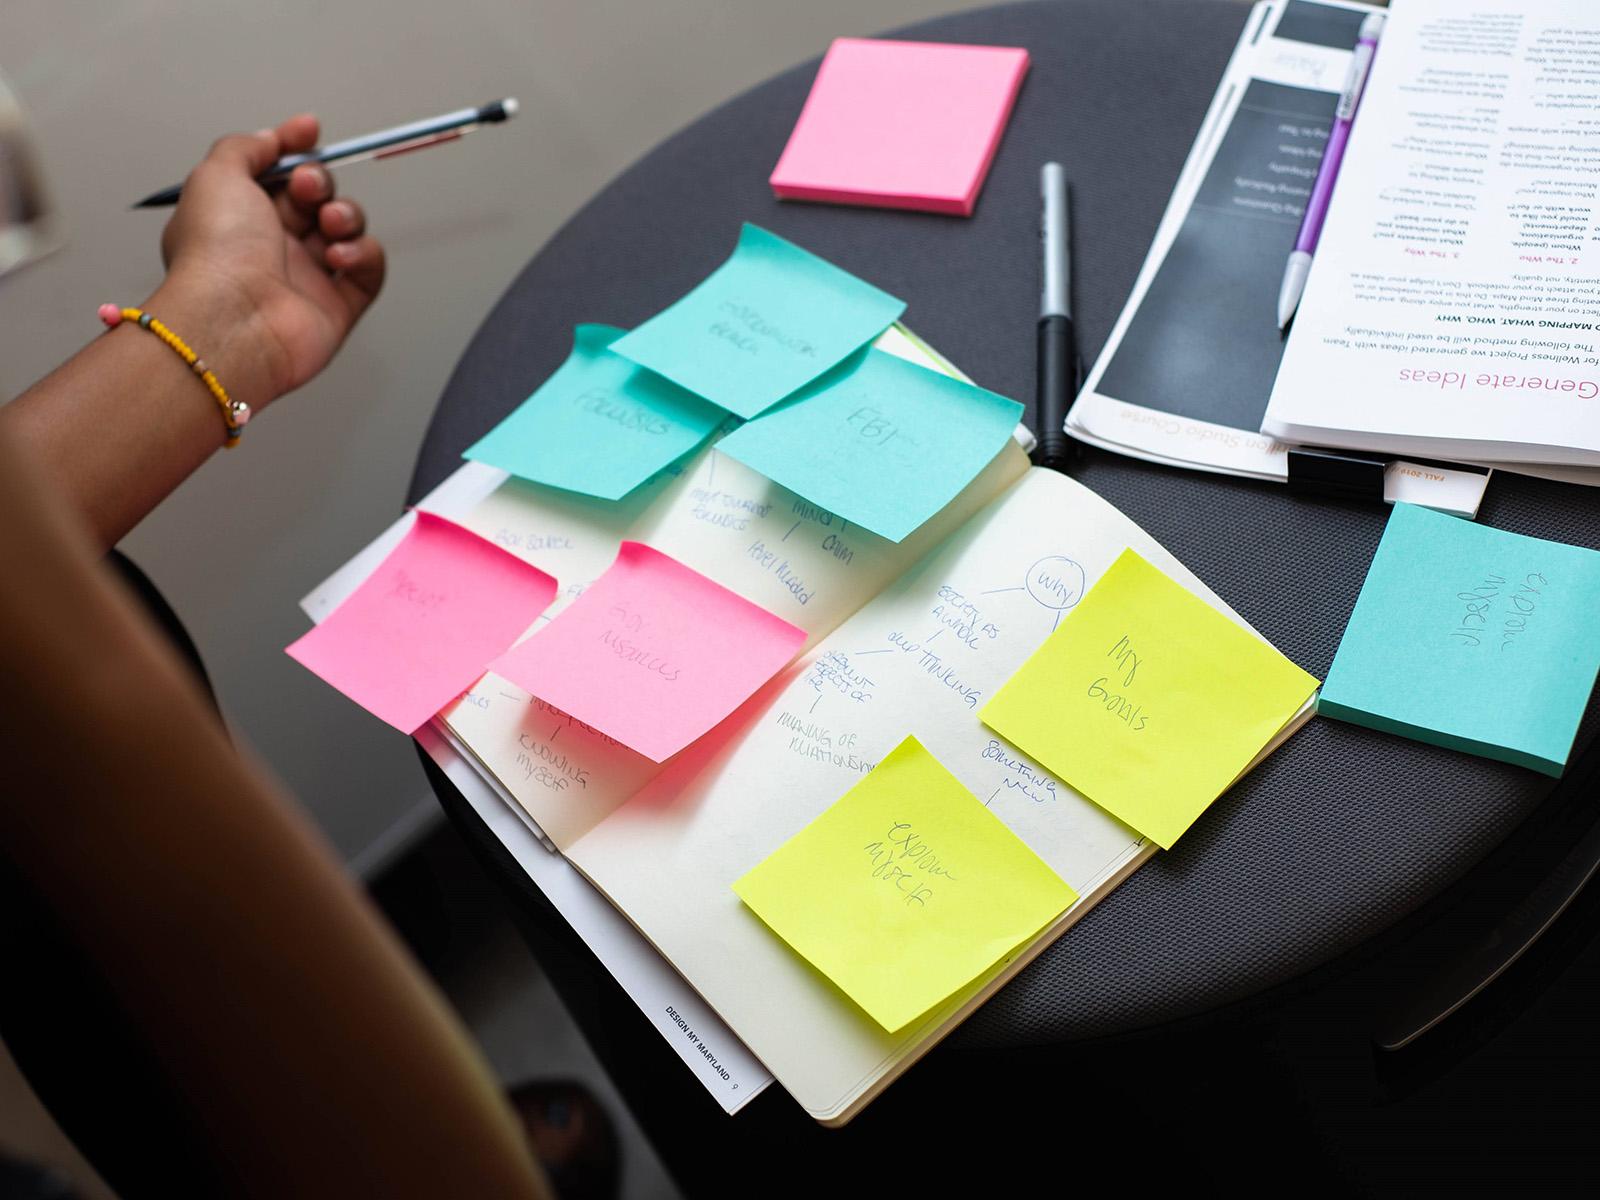 Post-It notes on notebook as part of mind-map exercise